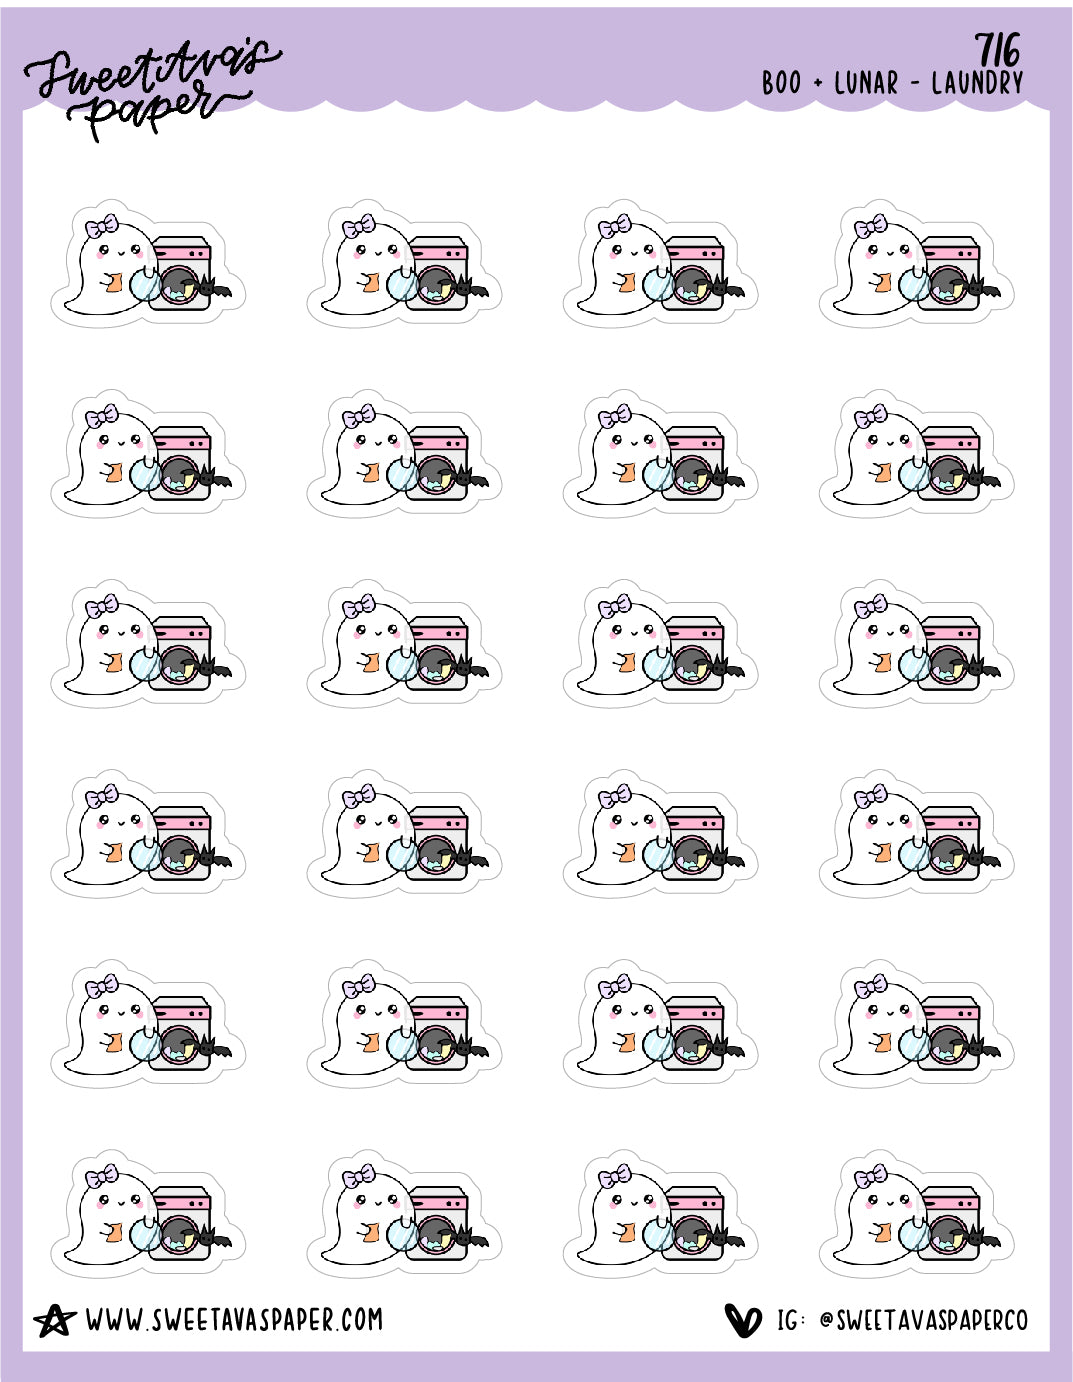 Laundry Planner Stickers - Boo and Lunar [716]